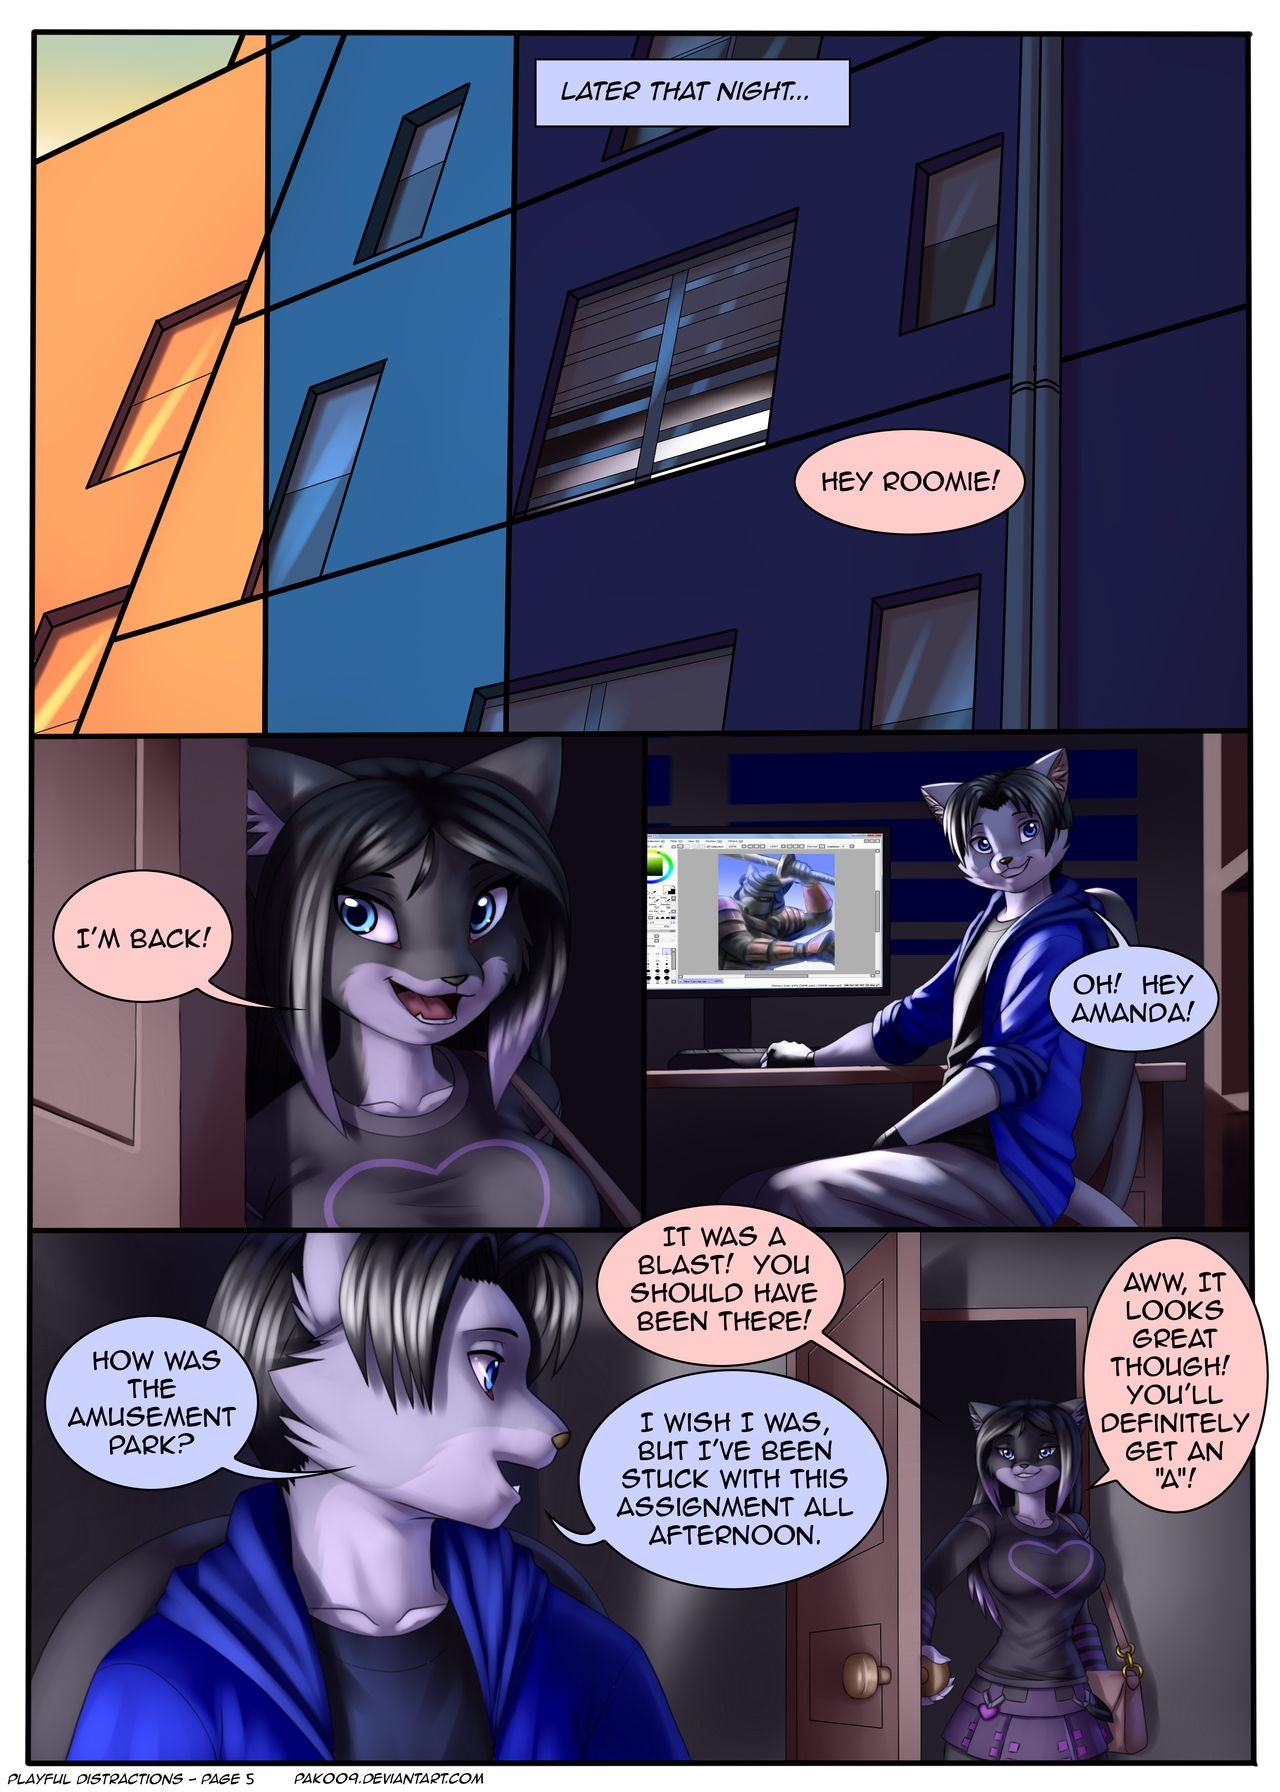 [Pak009] Playful Distractions (Chapter 2: Ongoing) 6